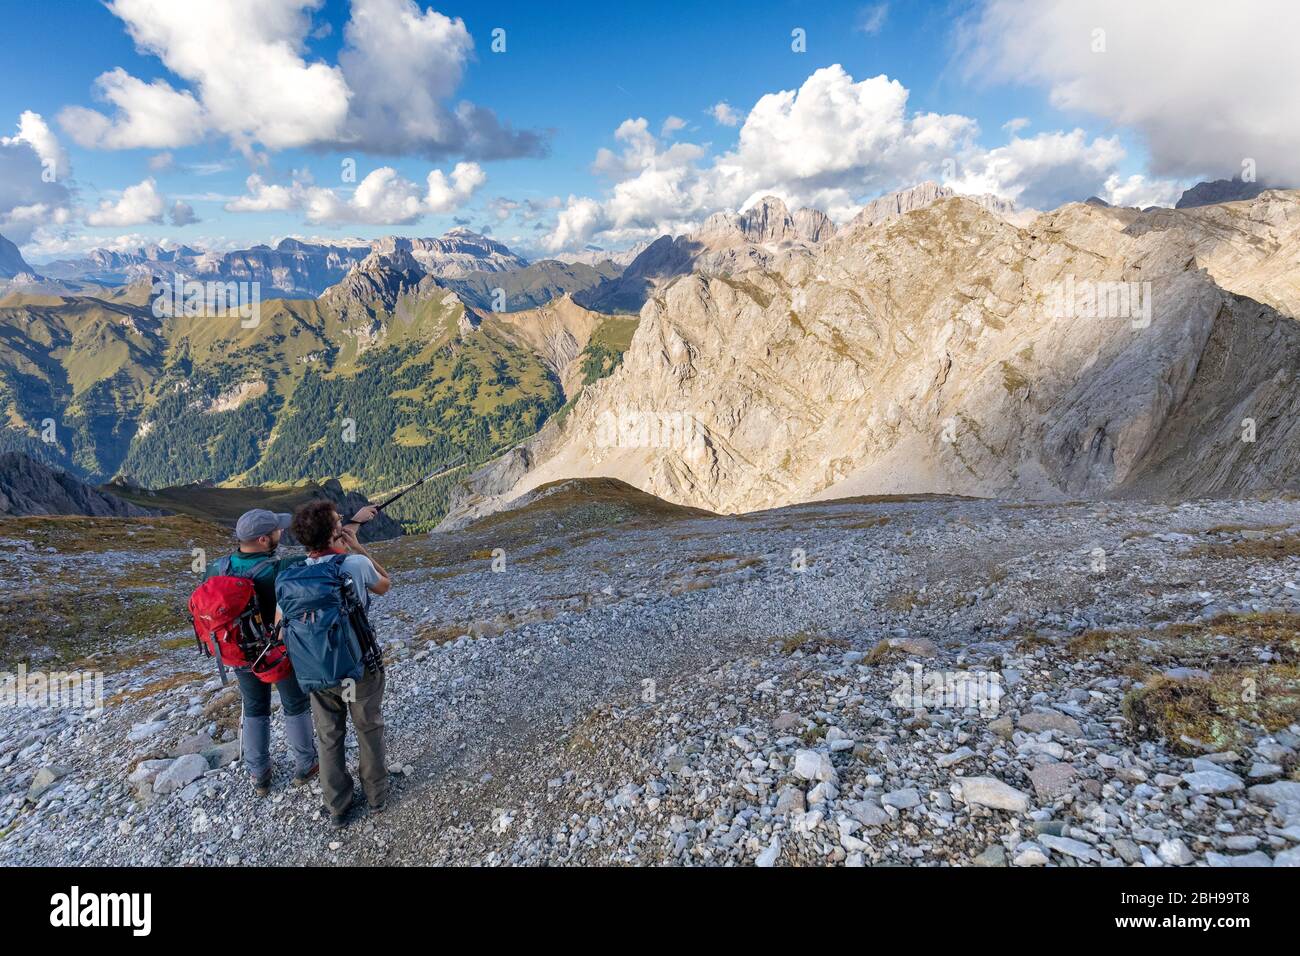 Two hikers observe Sella group and Marmolada group from the Bepi Zac High Trail, Costabella Ridge, Marmolada group, Dolomites, Fassa Valley, Trento province, Trentino-Alto Adige, Italy Stock Photo